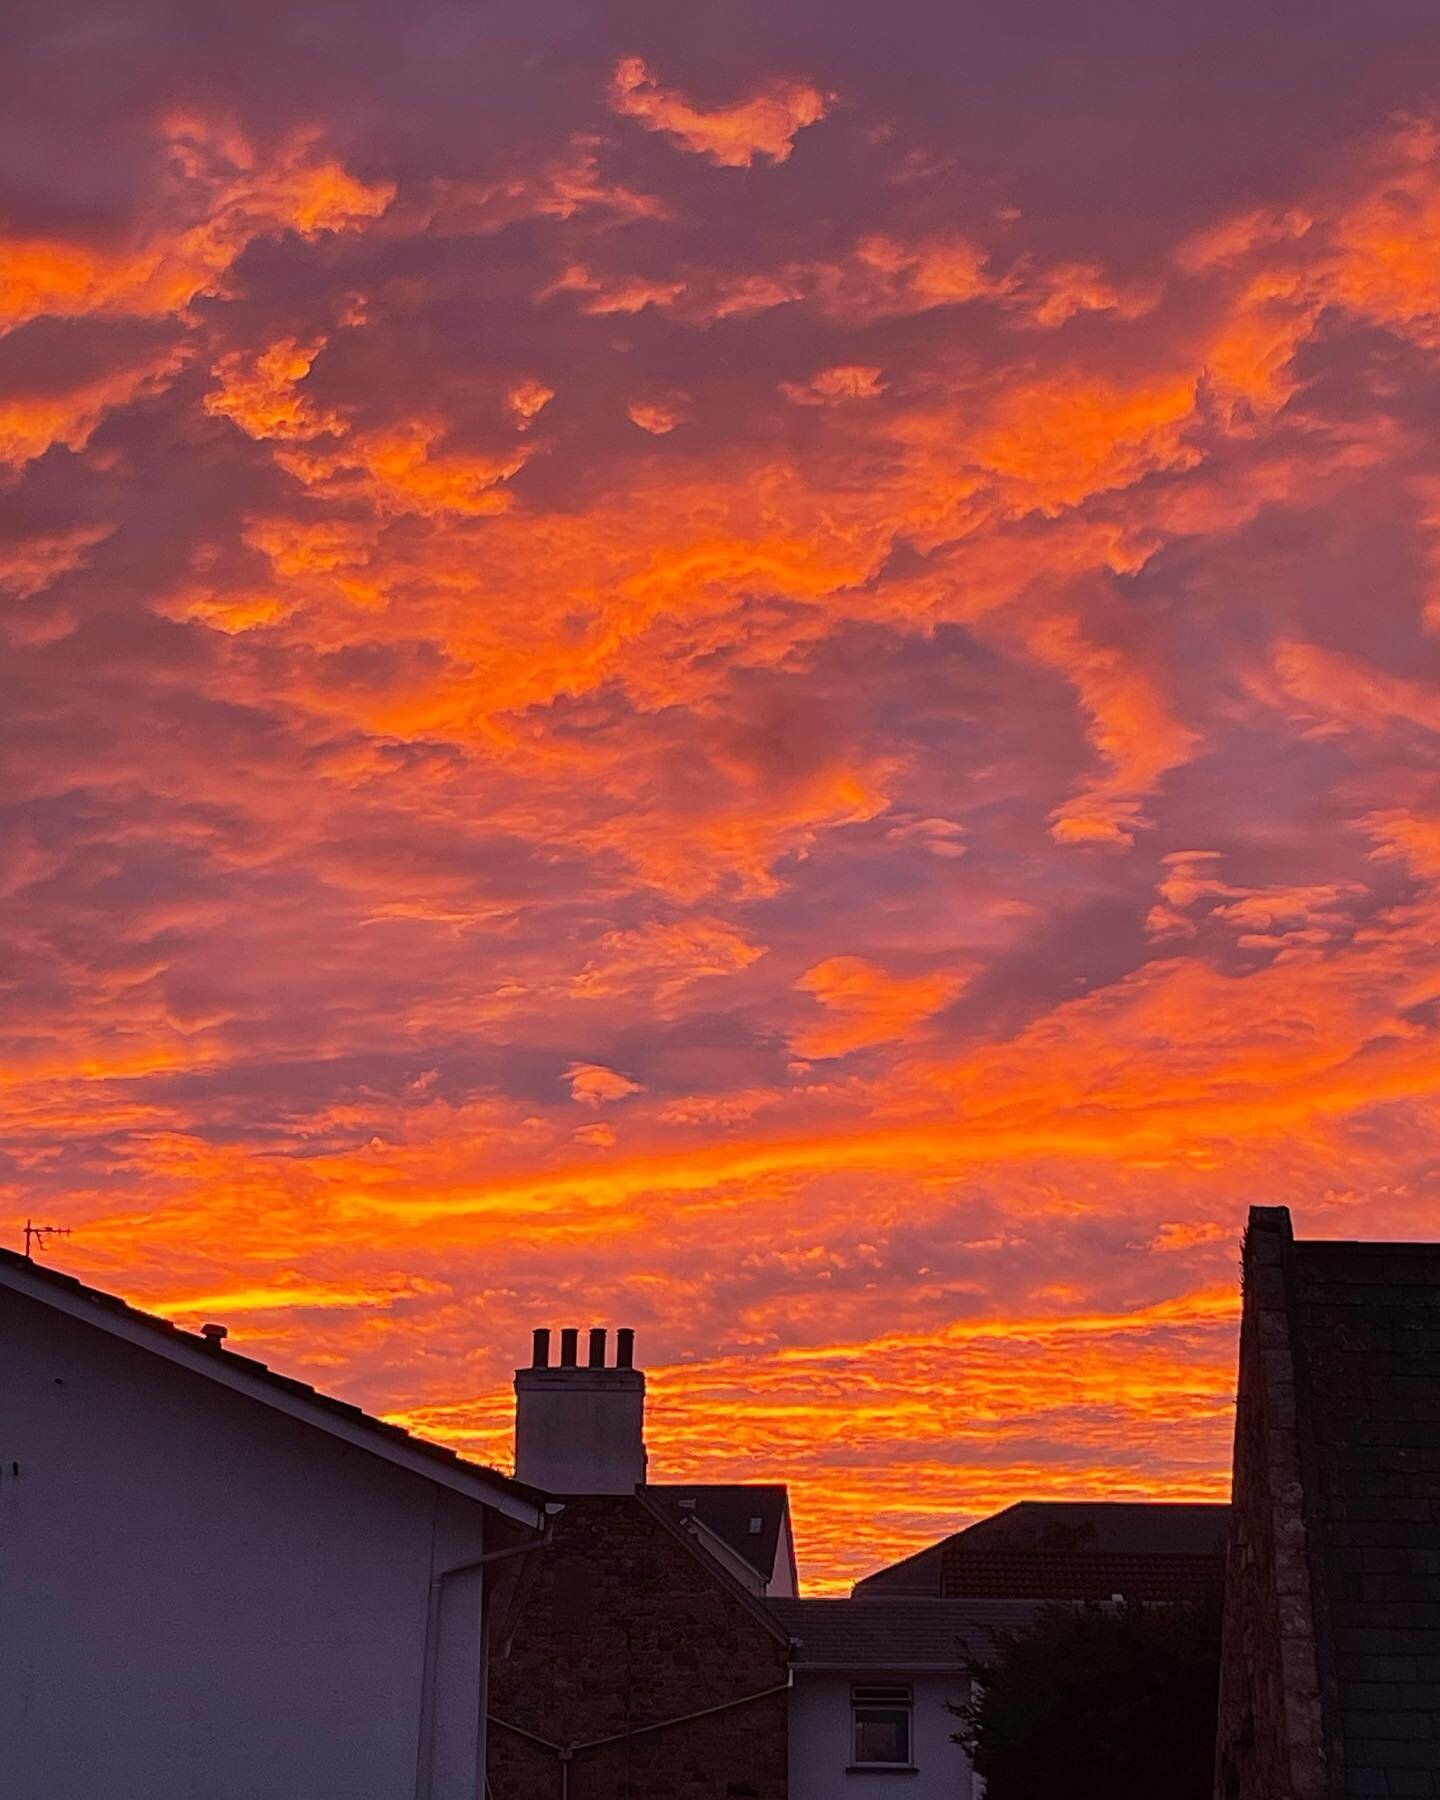 The sky is on 🔥 tonight.
It&rsquo;s getting in the Halloween mood 🎃
#sunset #jerseyci